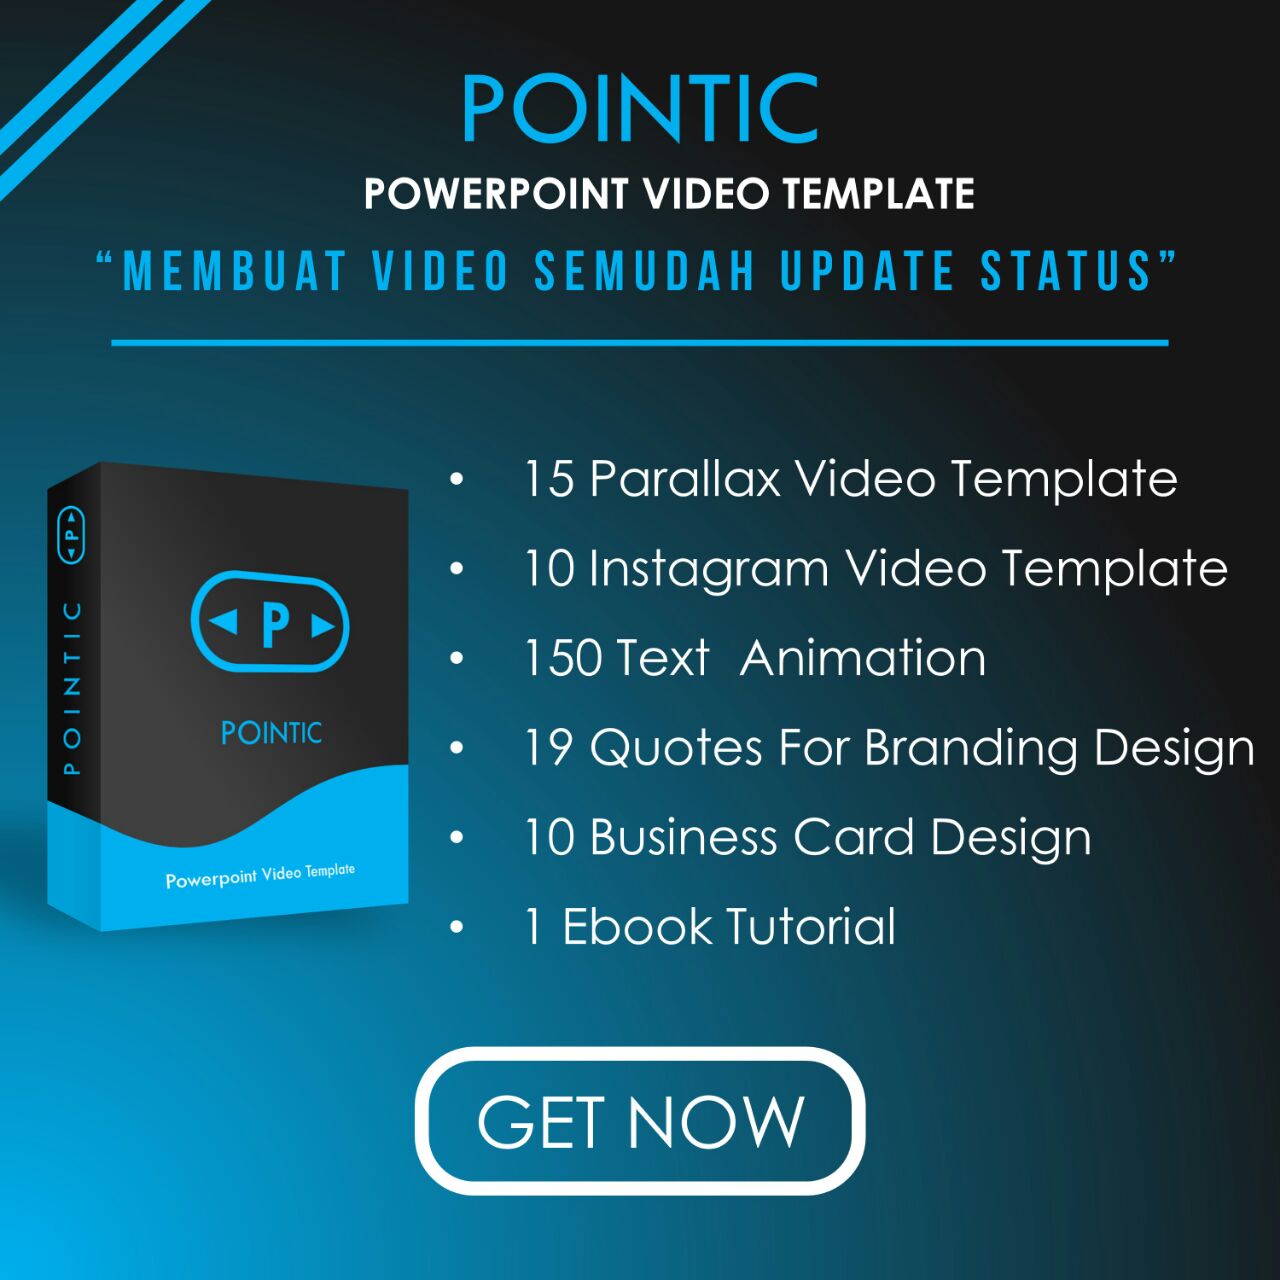 Pointic Video Template